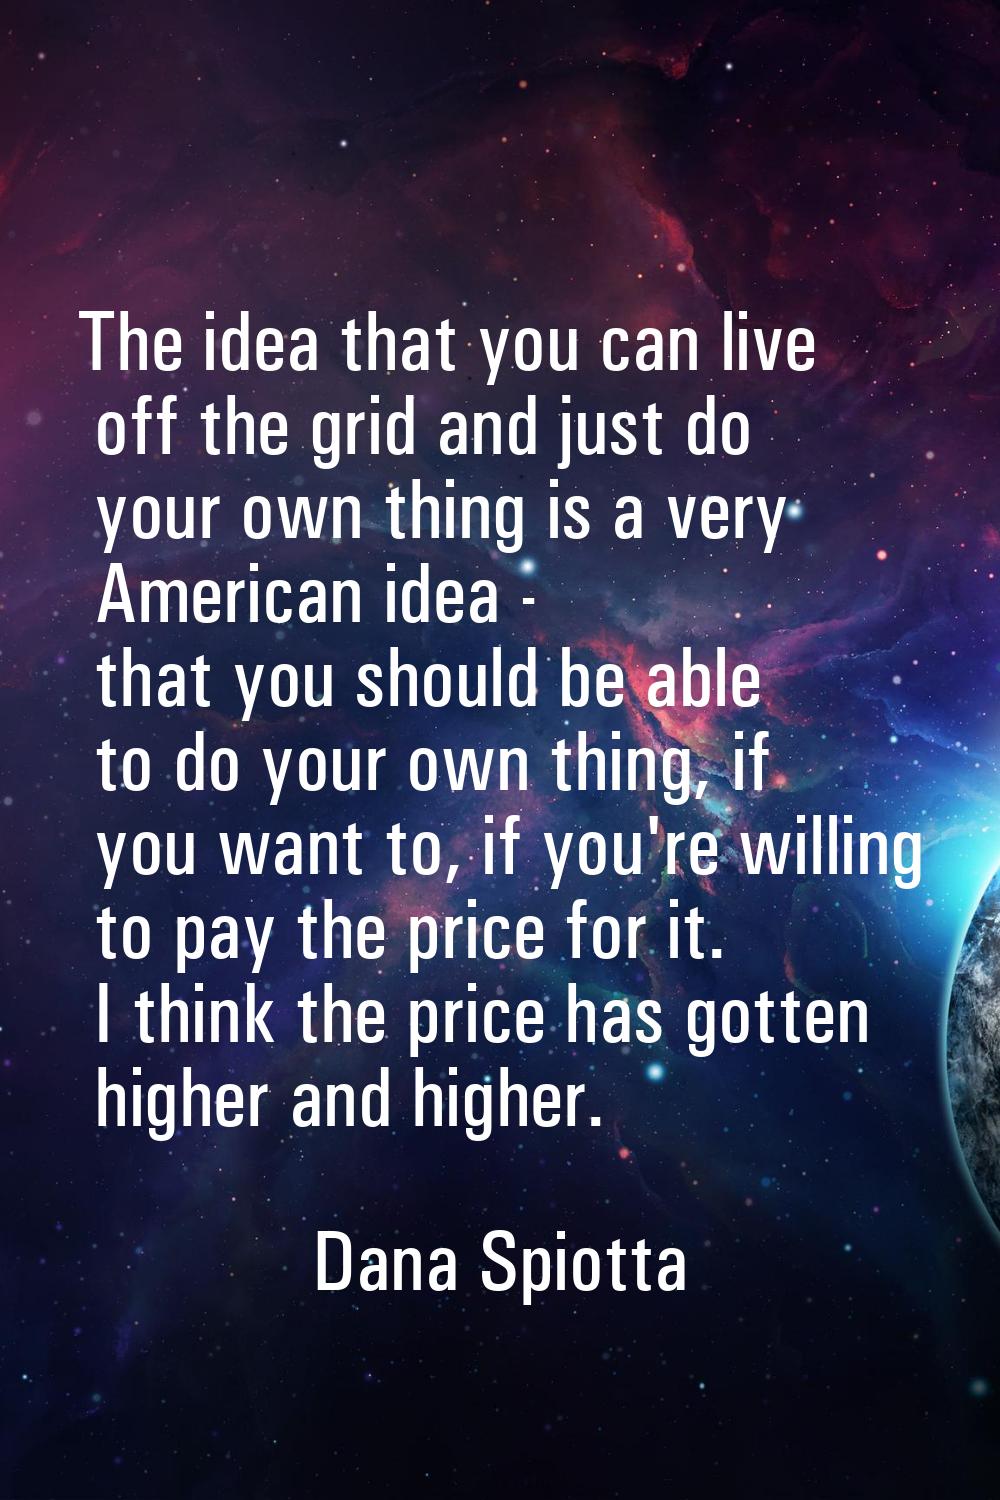 The idea that you can live off the grid and just do your own thing is a very American idea - that y